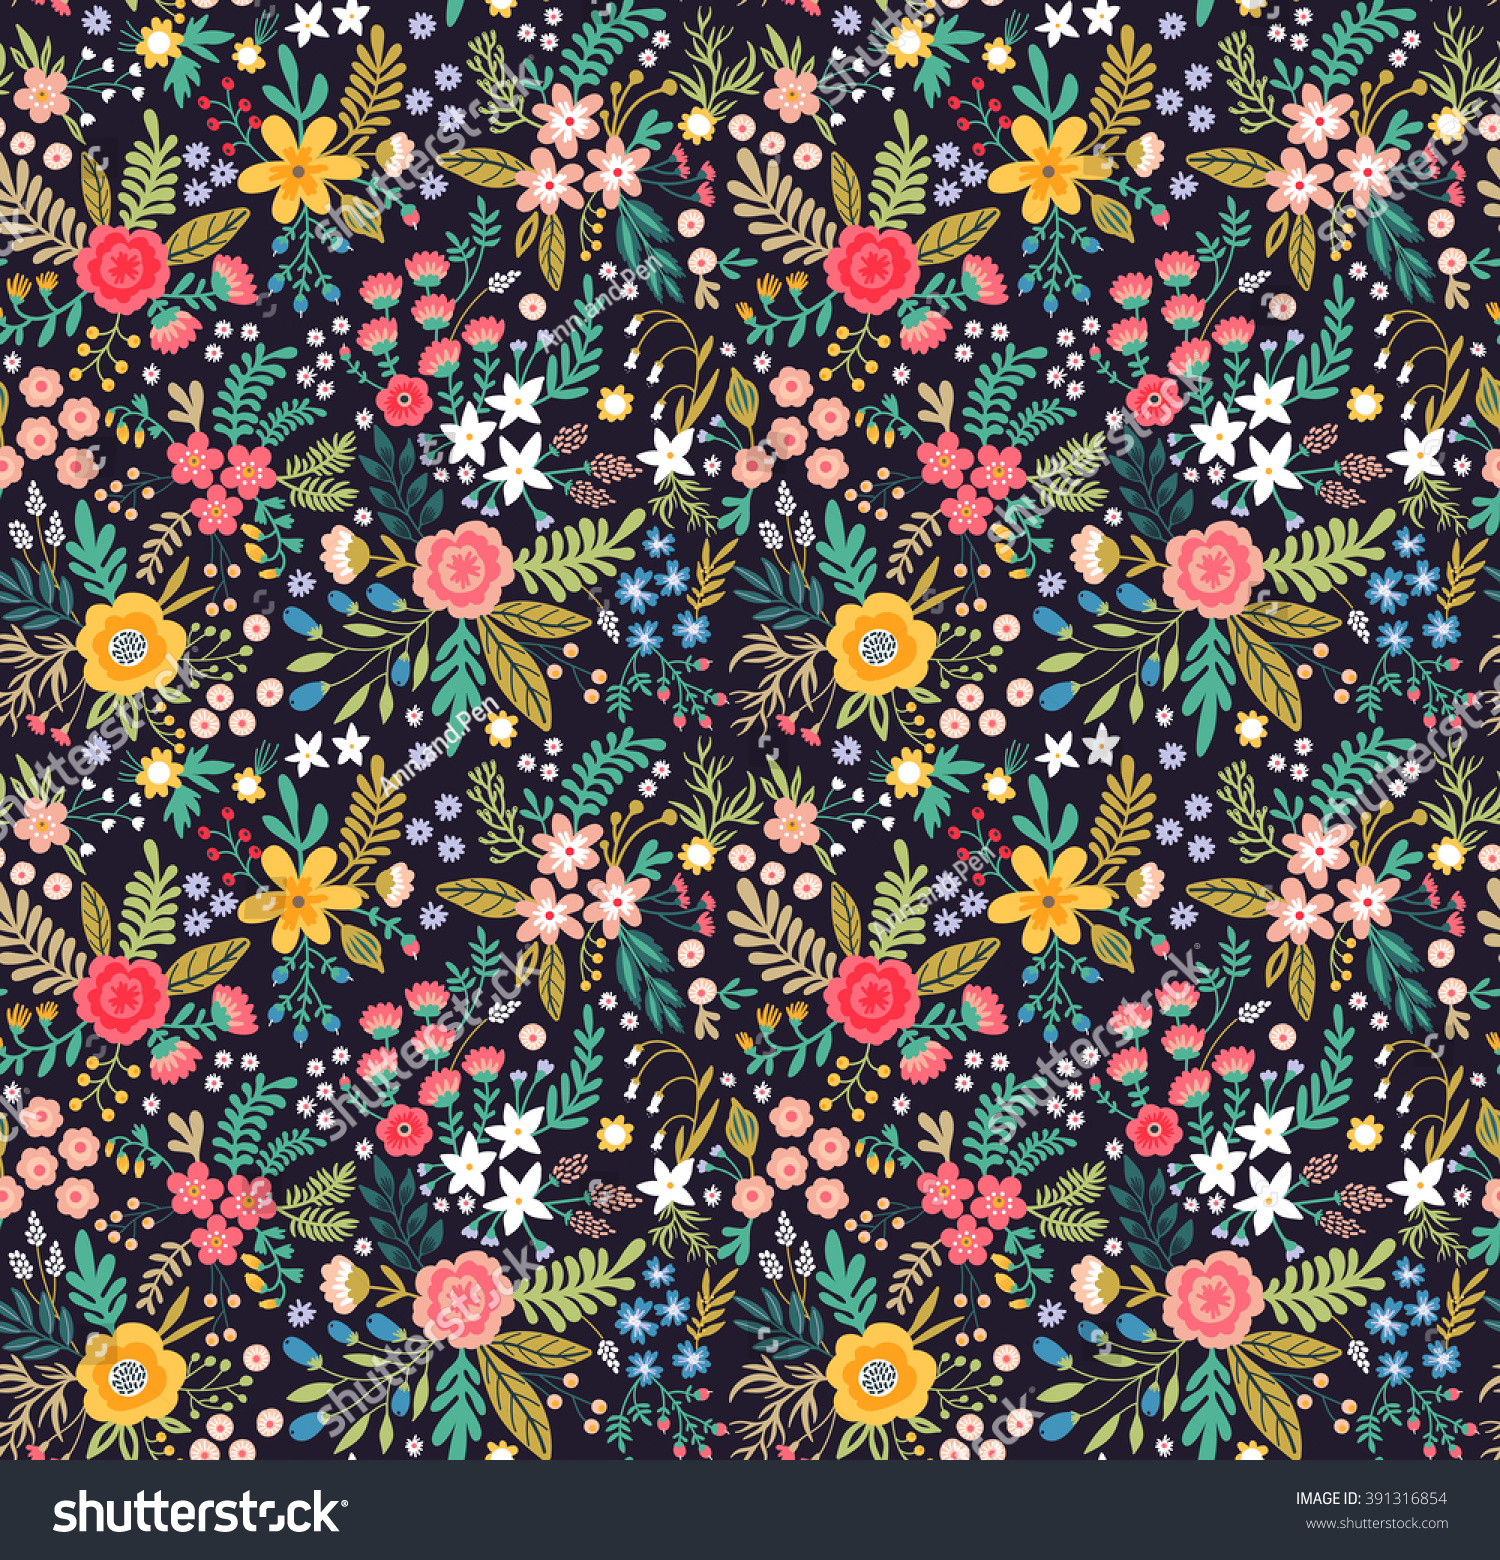 Amazing Floral Pattern Bright Colorful Flowers Stock Vector ...